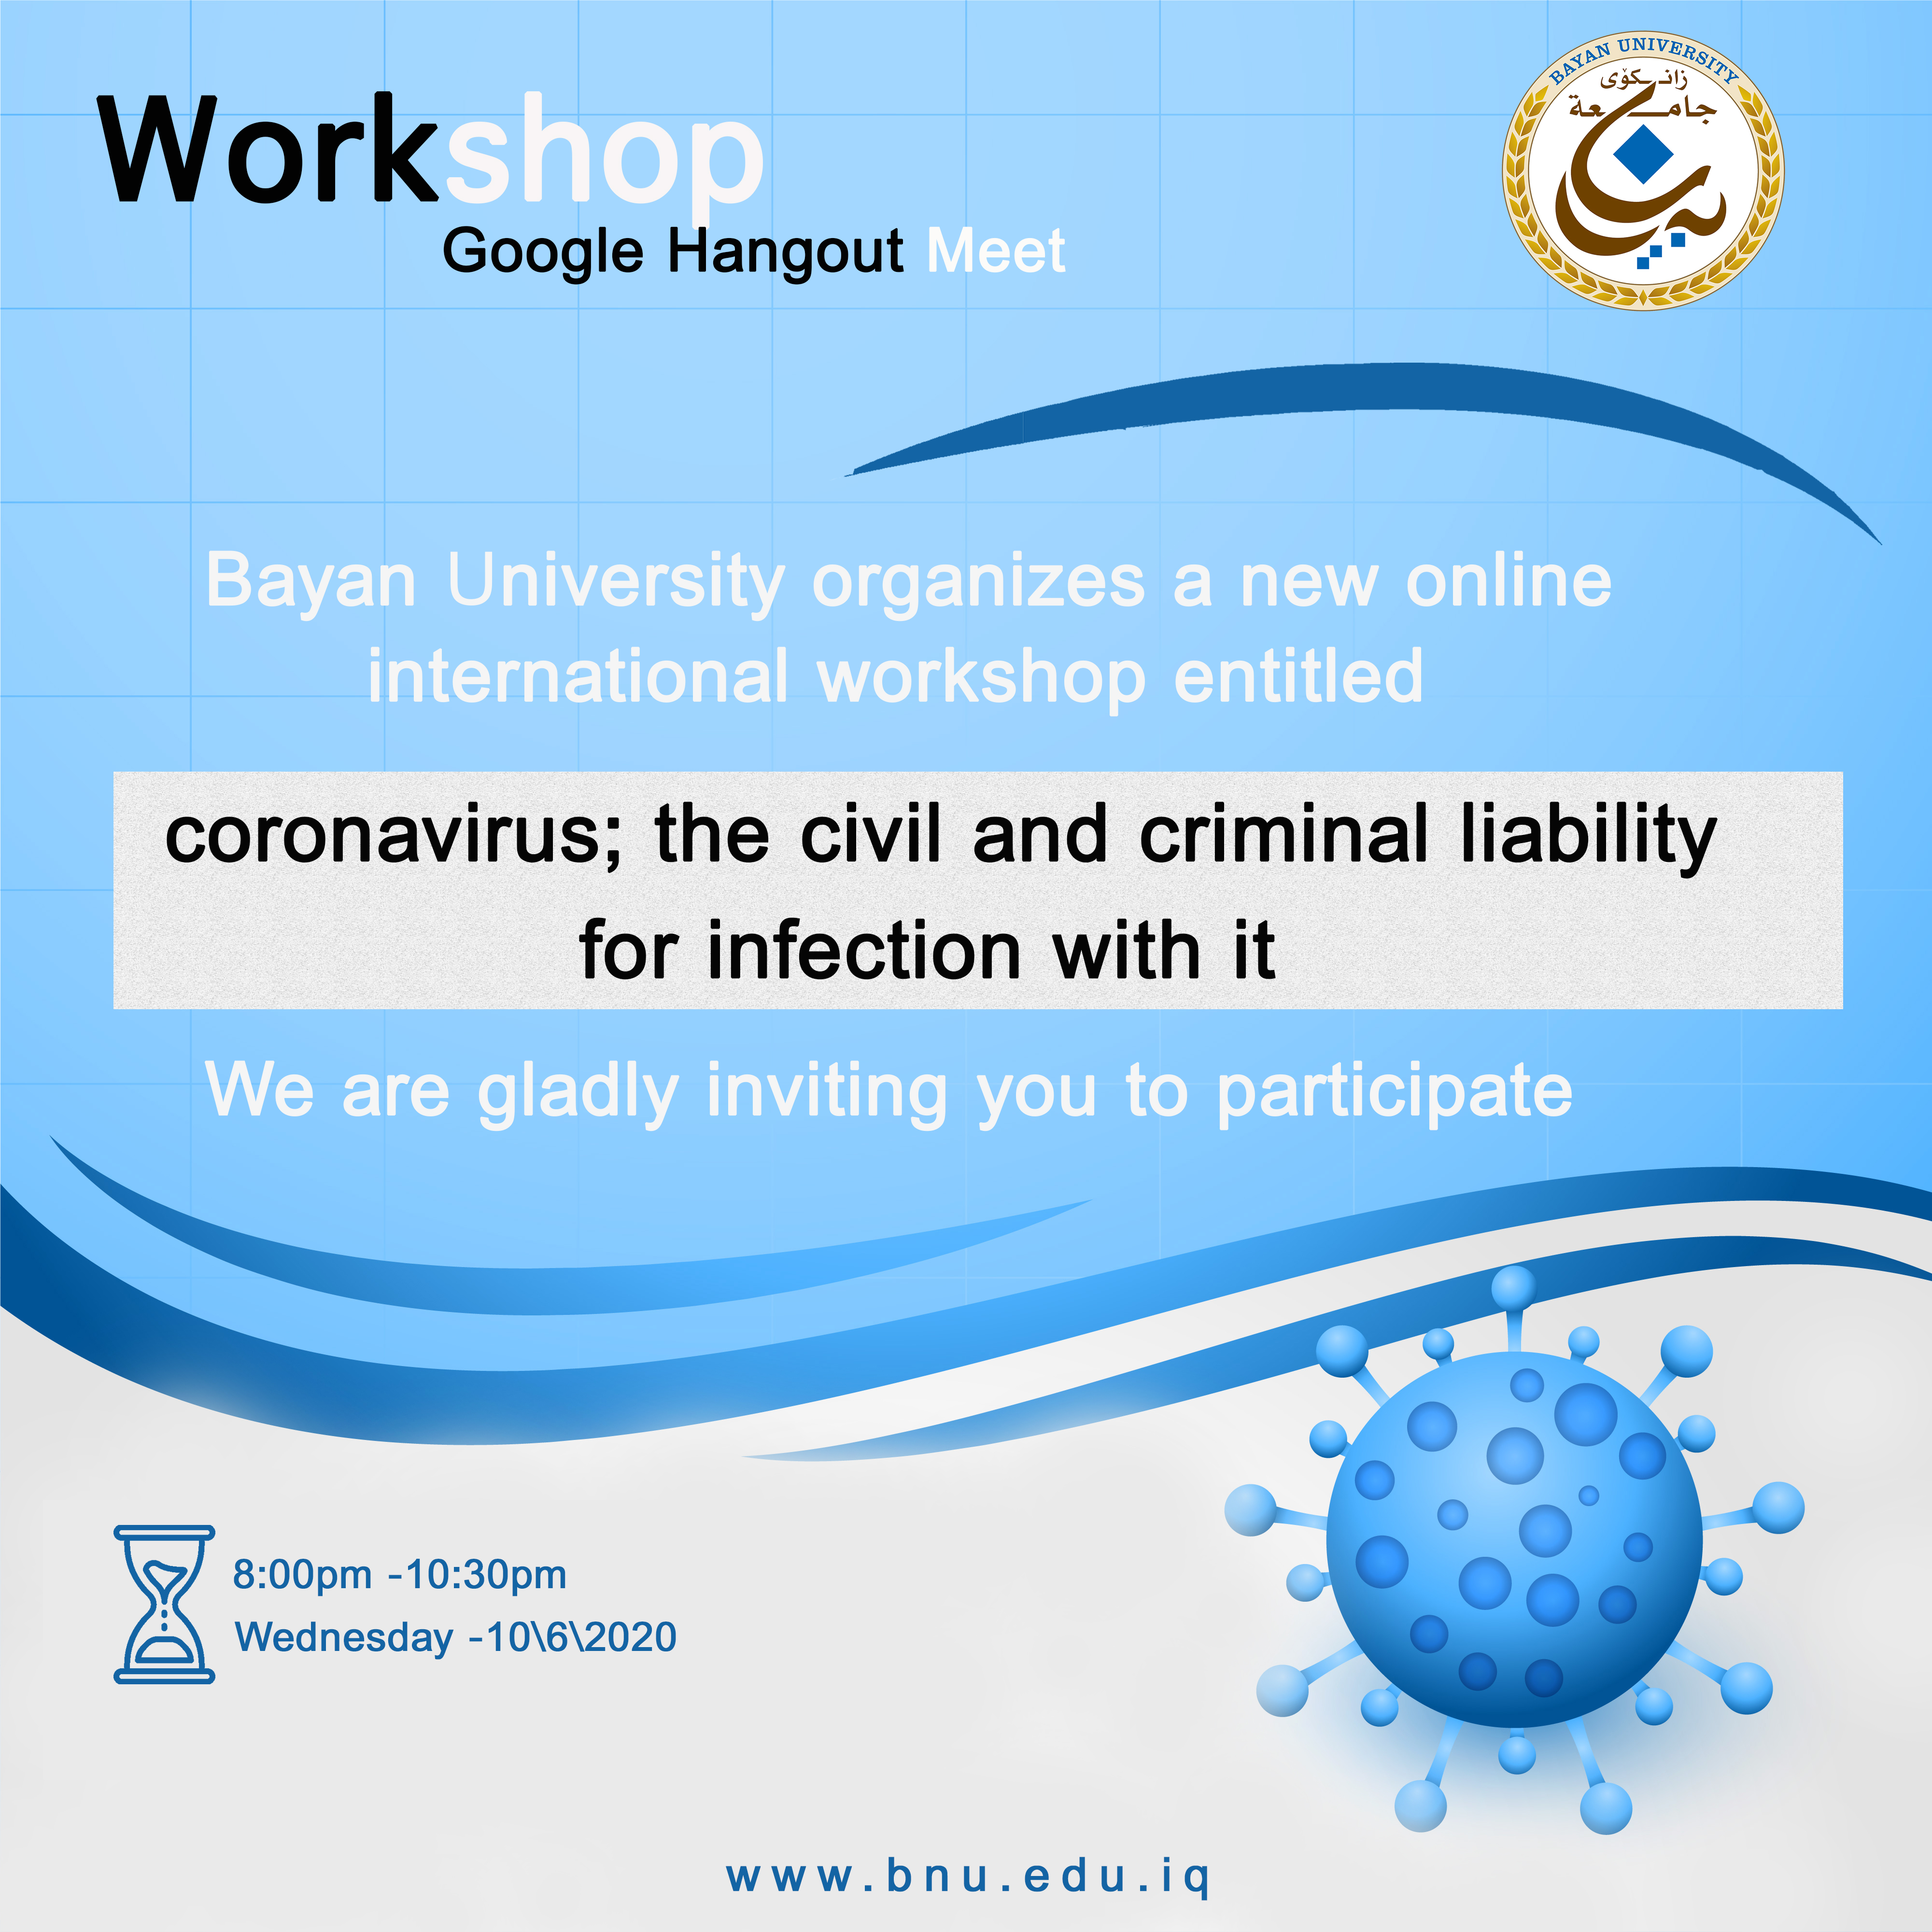 coronavirus; the civil and criminal liability for infection with it